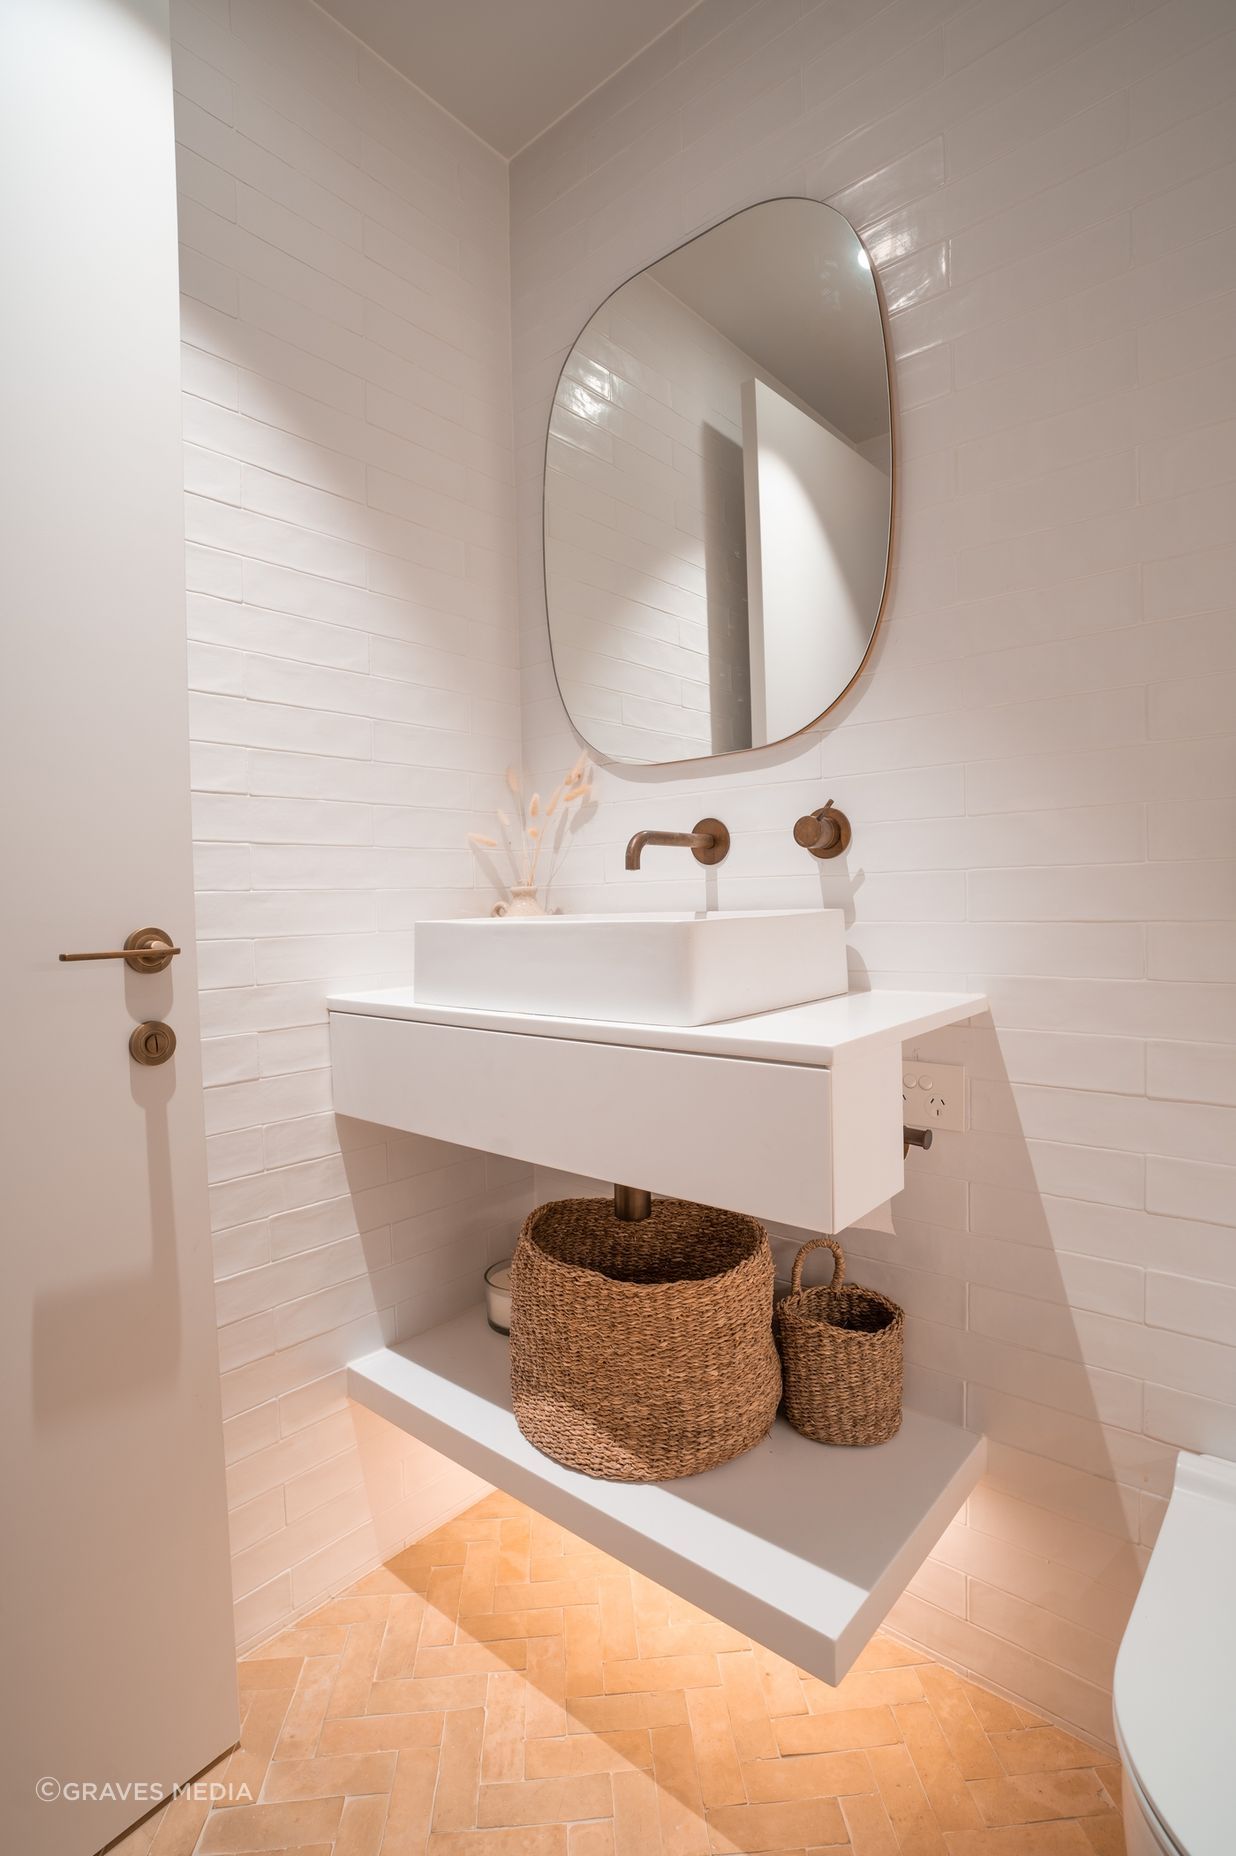 Handmade terracotta floor tiles bring warms and texture to the master ensuite.